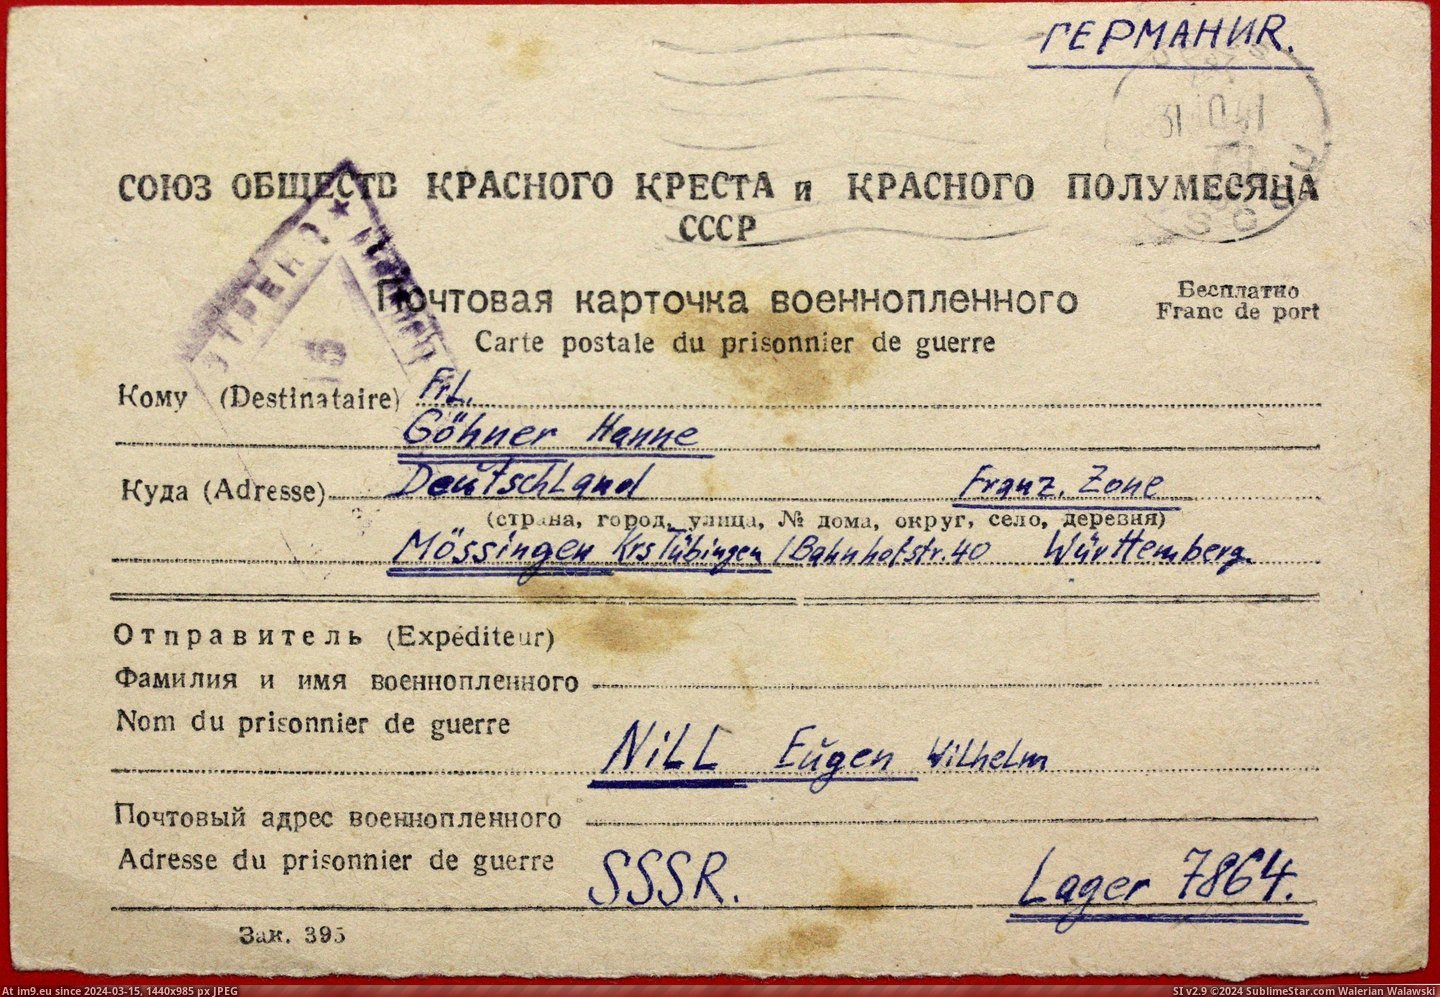 #Grandfather #Allowed #Postcard #Write #Imprisonment #Camp #Soviet [Pics] During my grandfather's imprisonment in a Soviet POW camp, he was only allowed to write the occasional postcard to his fi Pic. (Obraz z album My r/PICS favs))